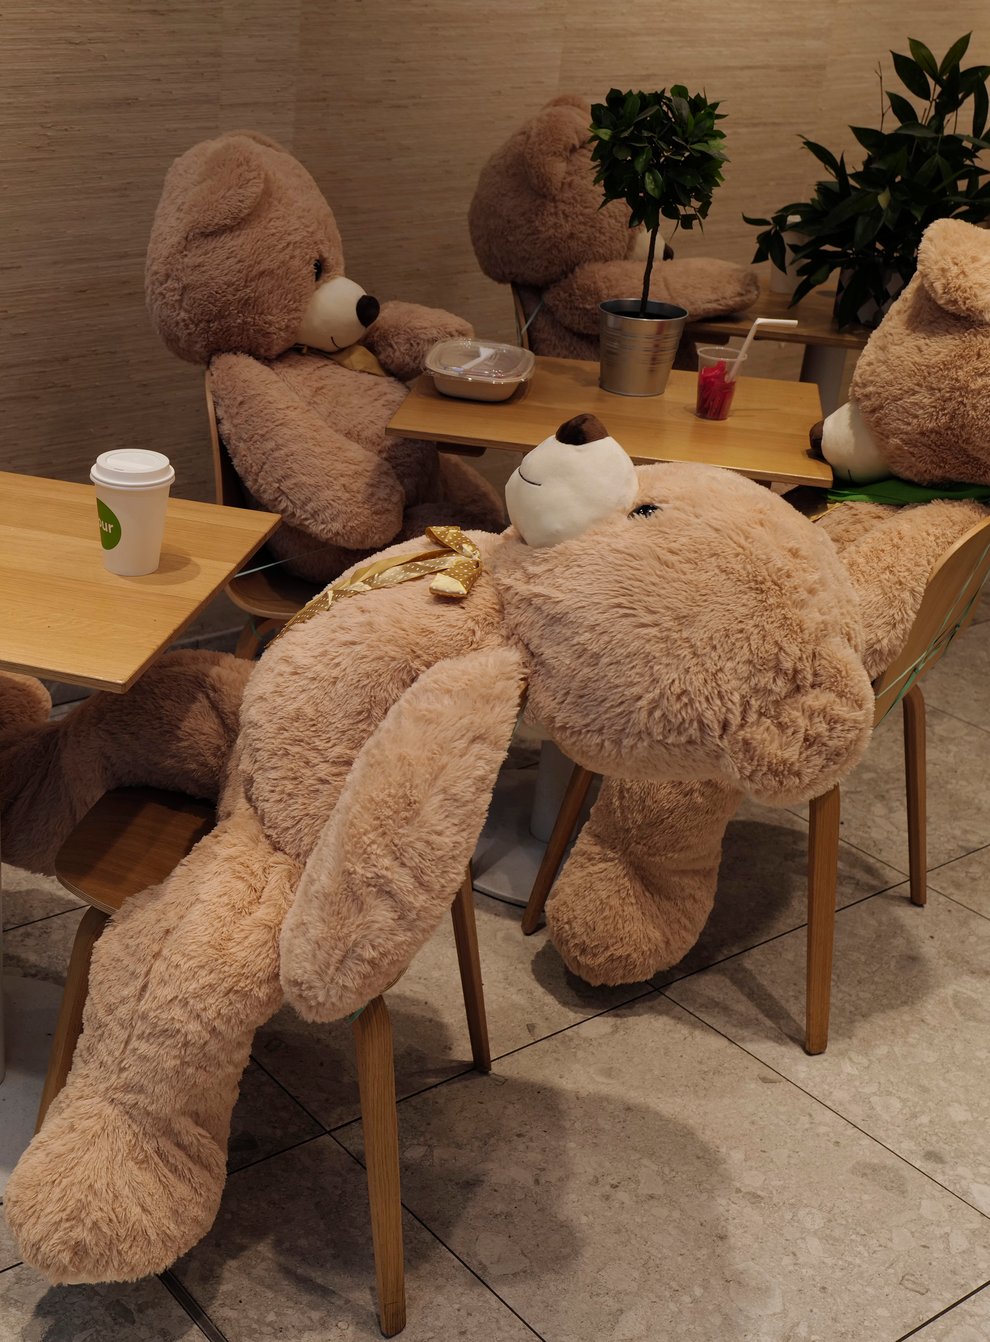 A closed restaurant filled with teddy bears set up by Philippe Labourel in Paris